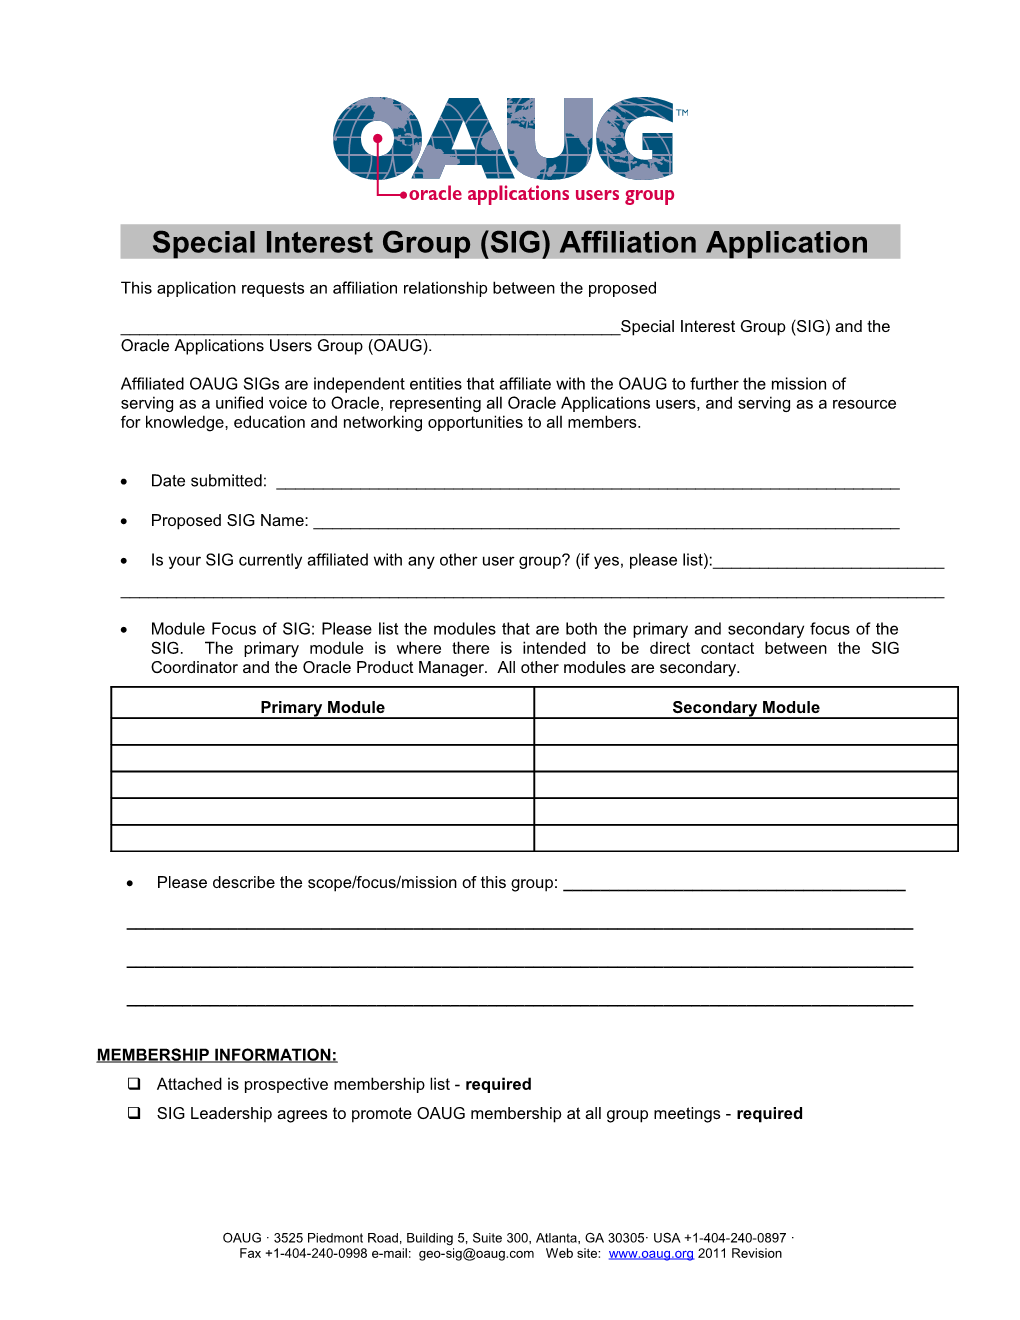 Special Interest Group Affiliation Agreement